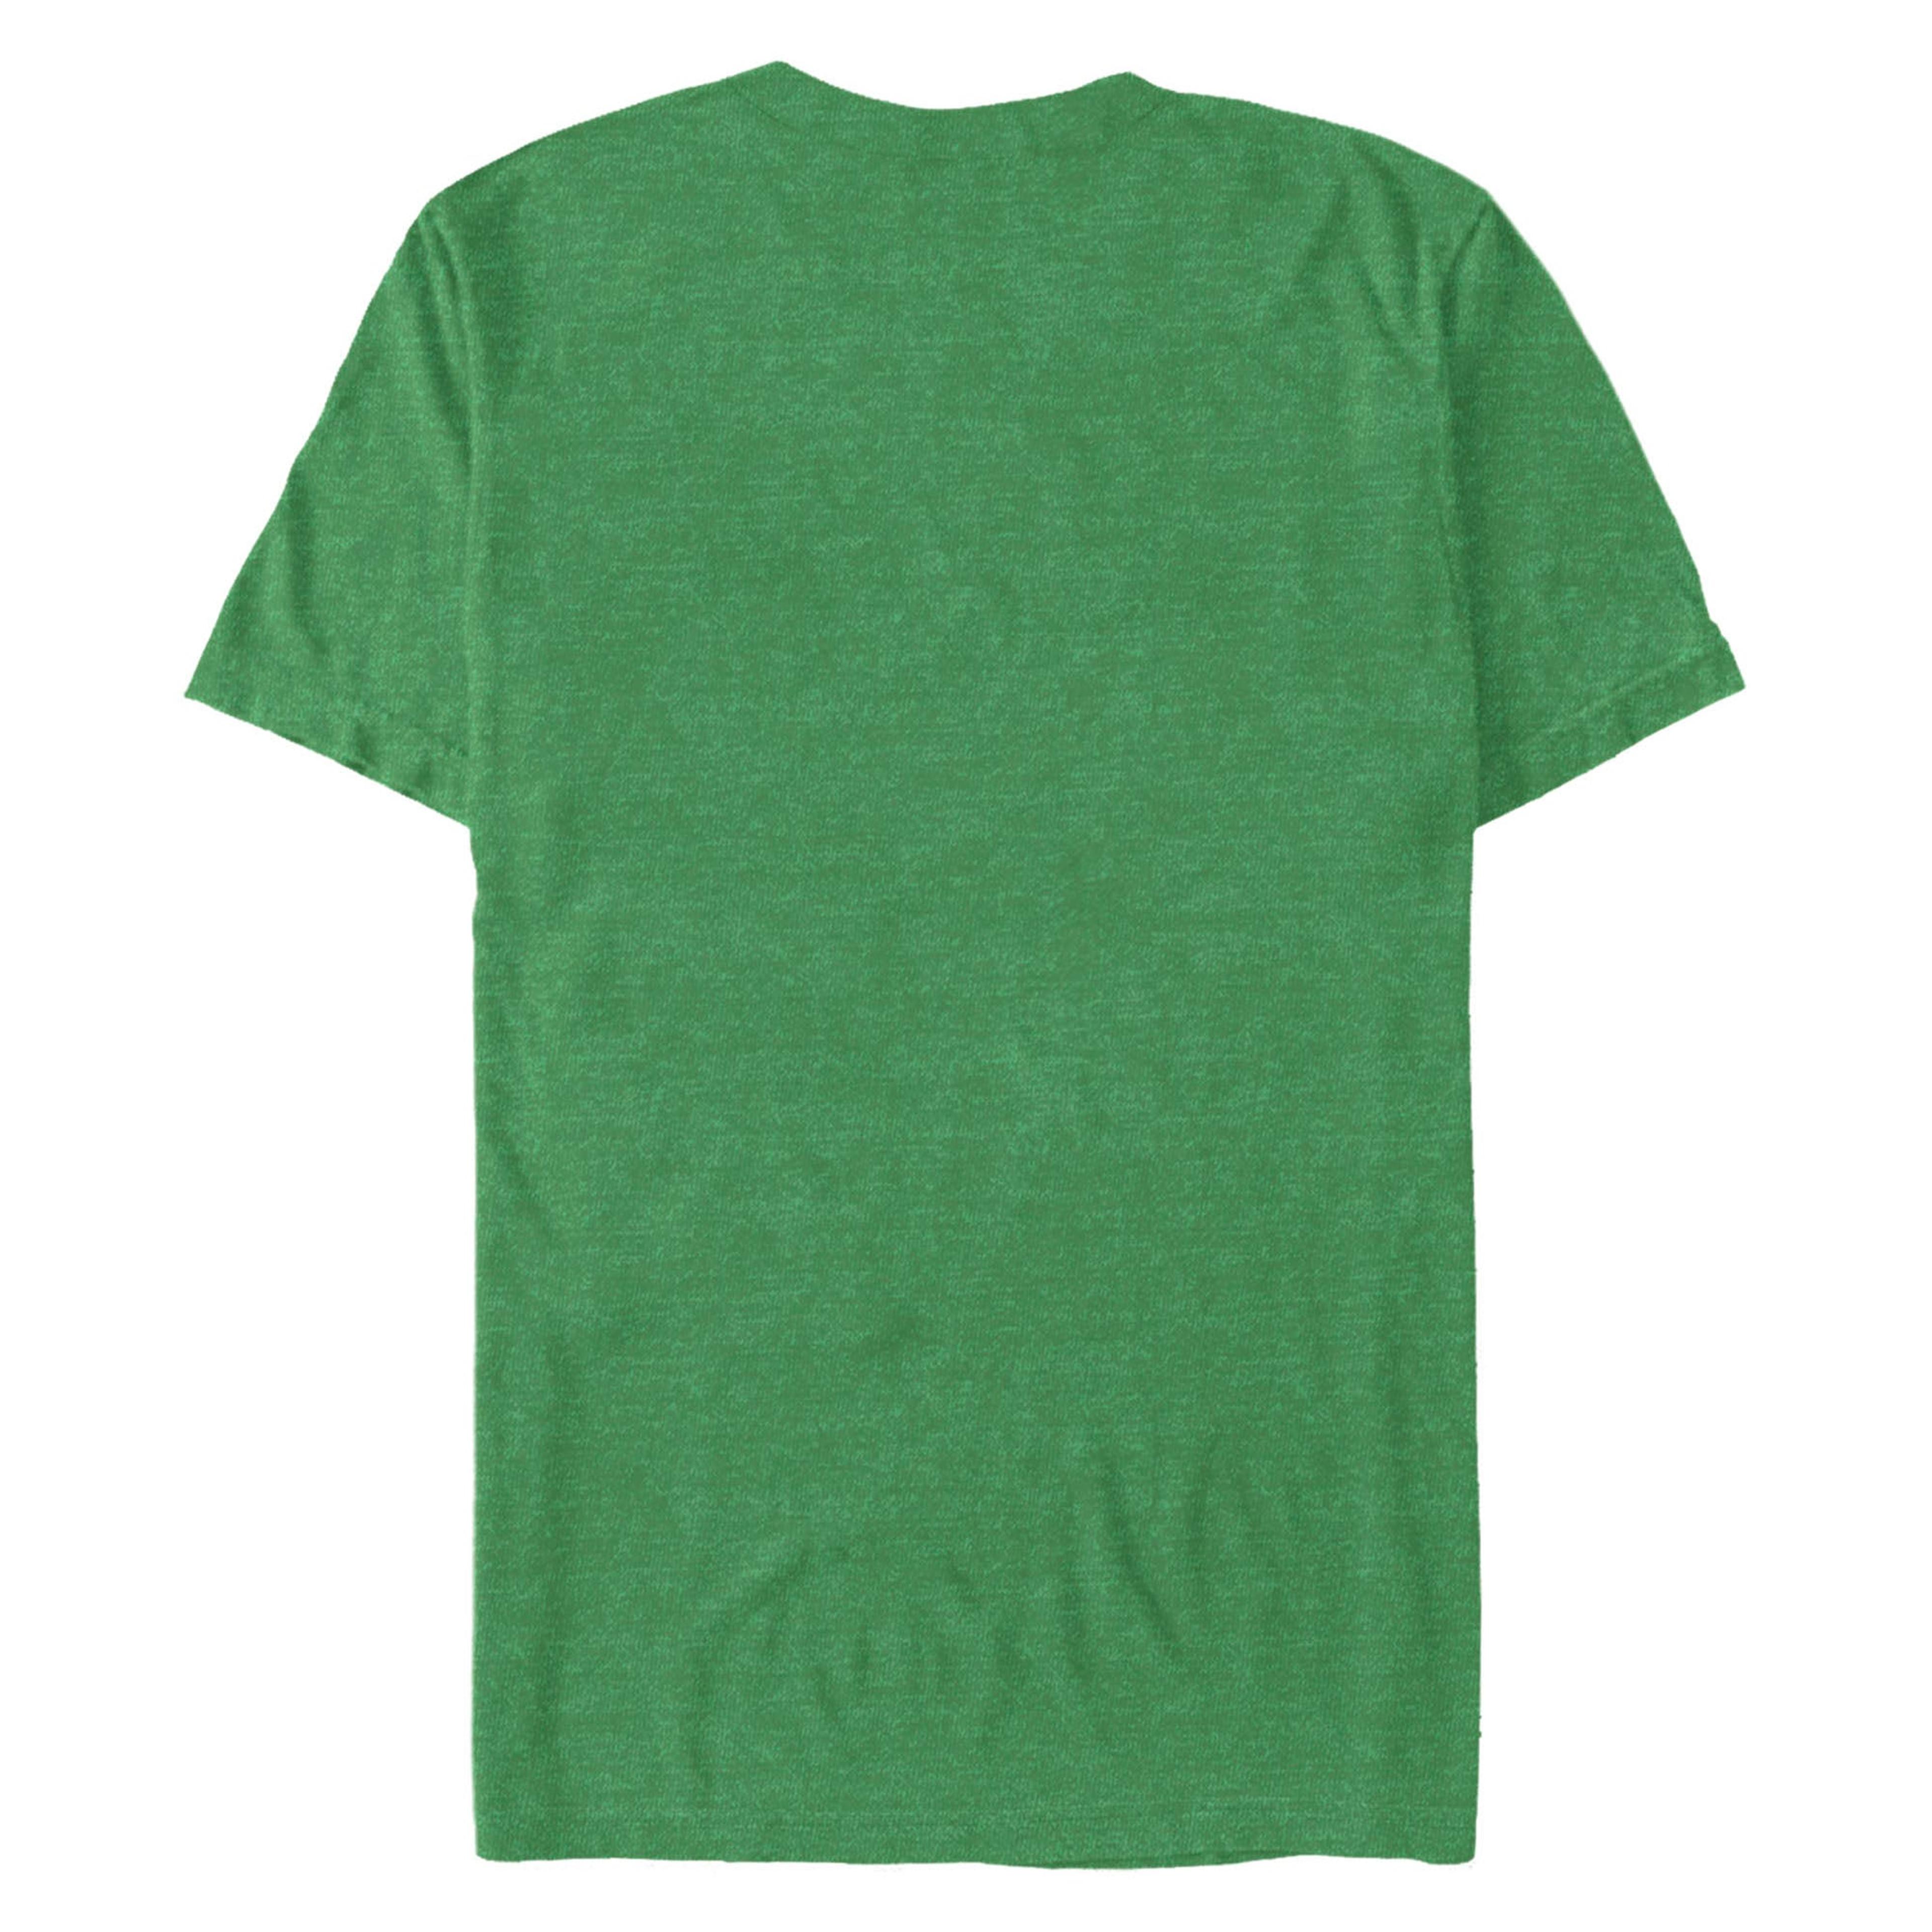 Alternate View 2 of Men's The Muppets Kermit Costume Tee T-Shirt